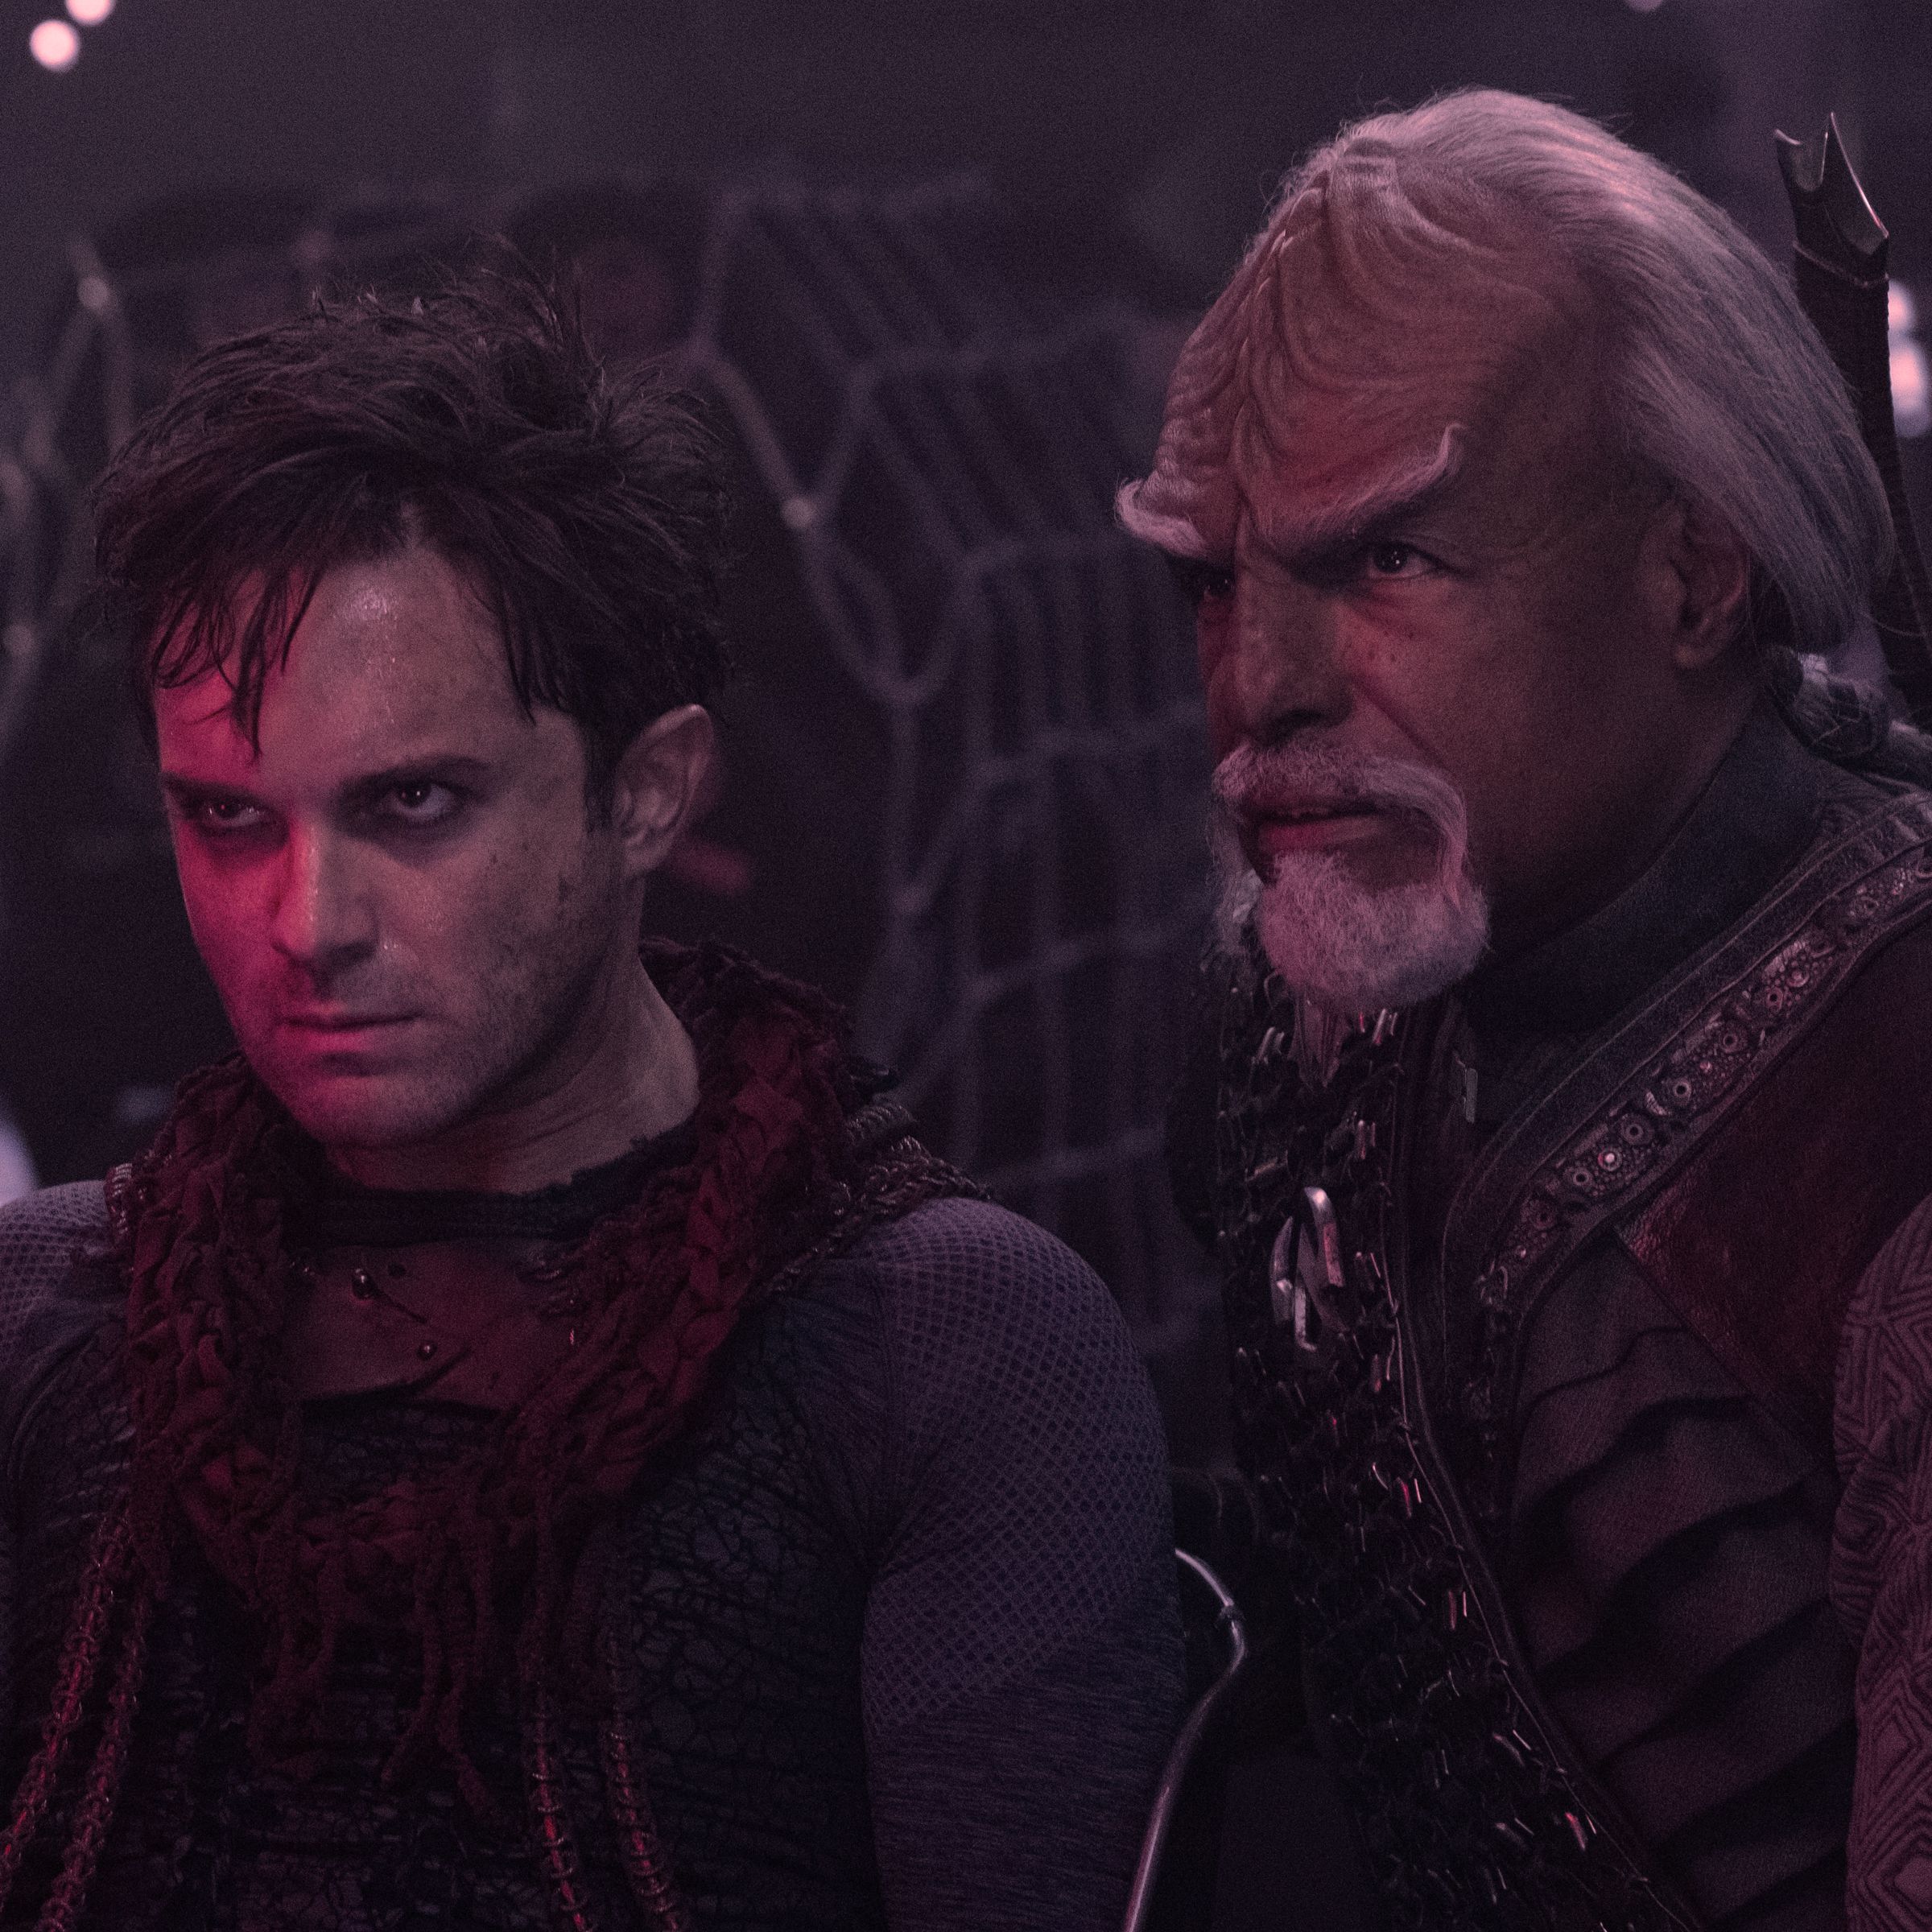 Two men look at something off-screen. One is a white man covered in grease; the other is Michael Dorn in Klingon makeup with white hair and large prominent cranial ridges.